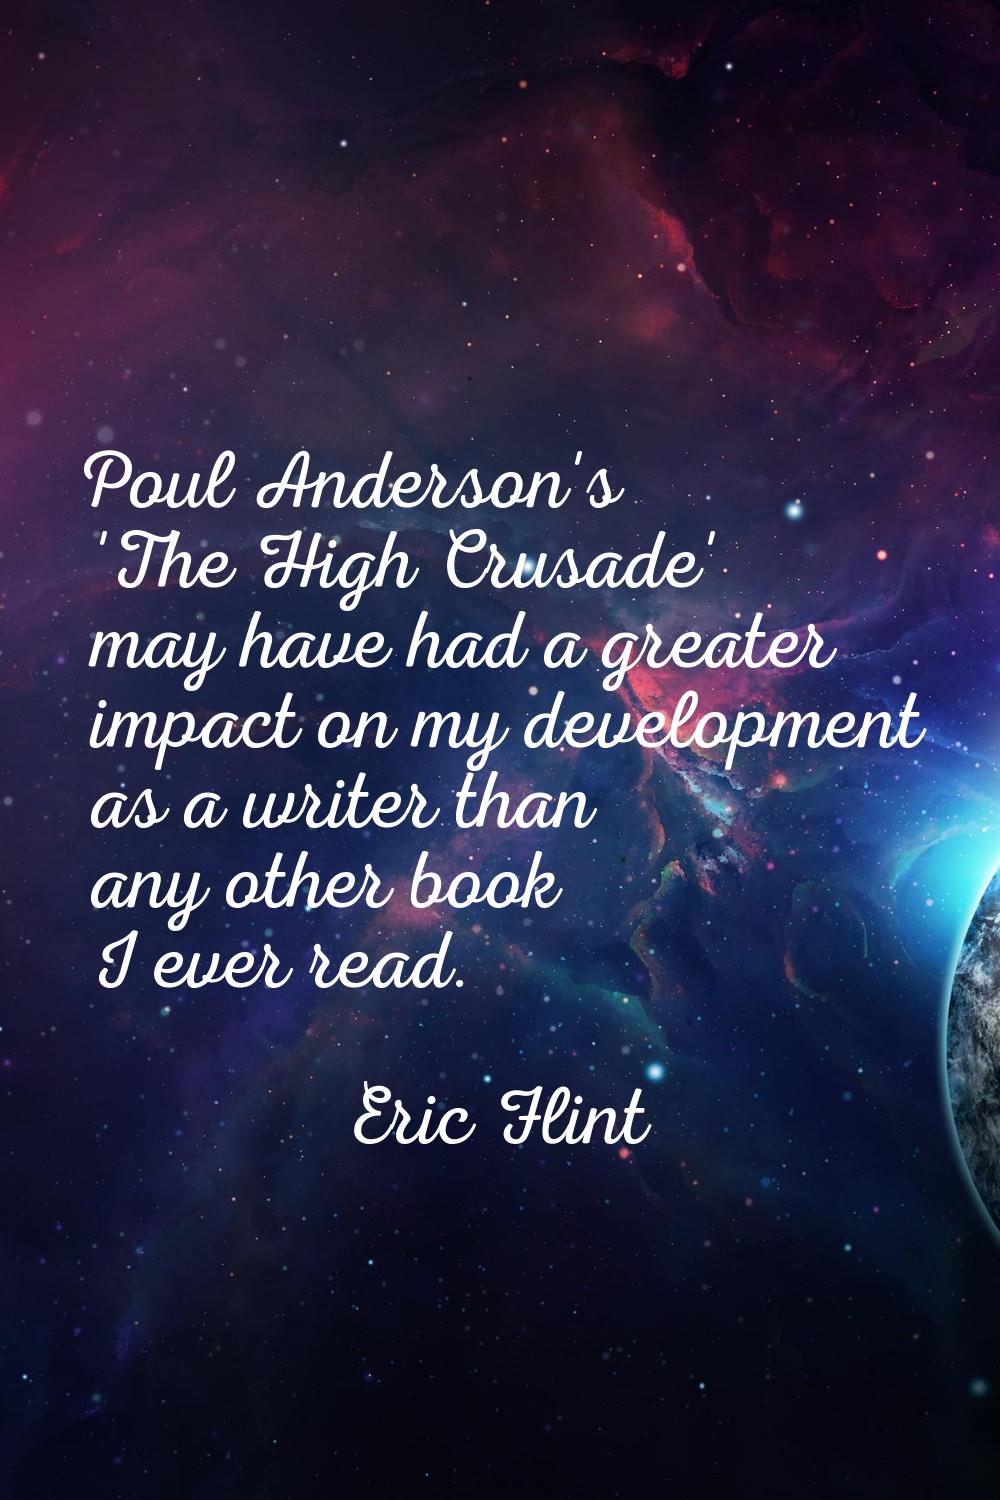 Poul Anderson's 'The High Crusade' may have had a greater impact on my development as a writer than